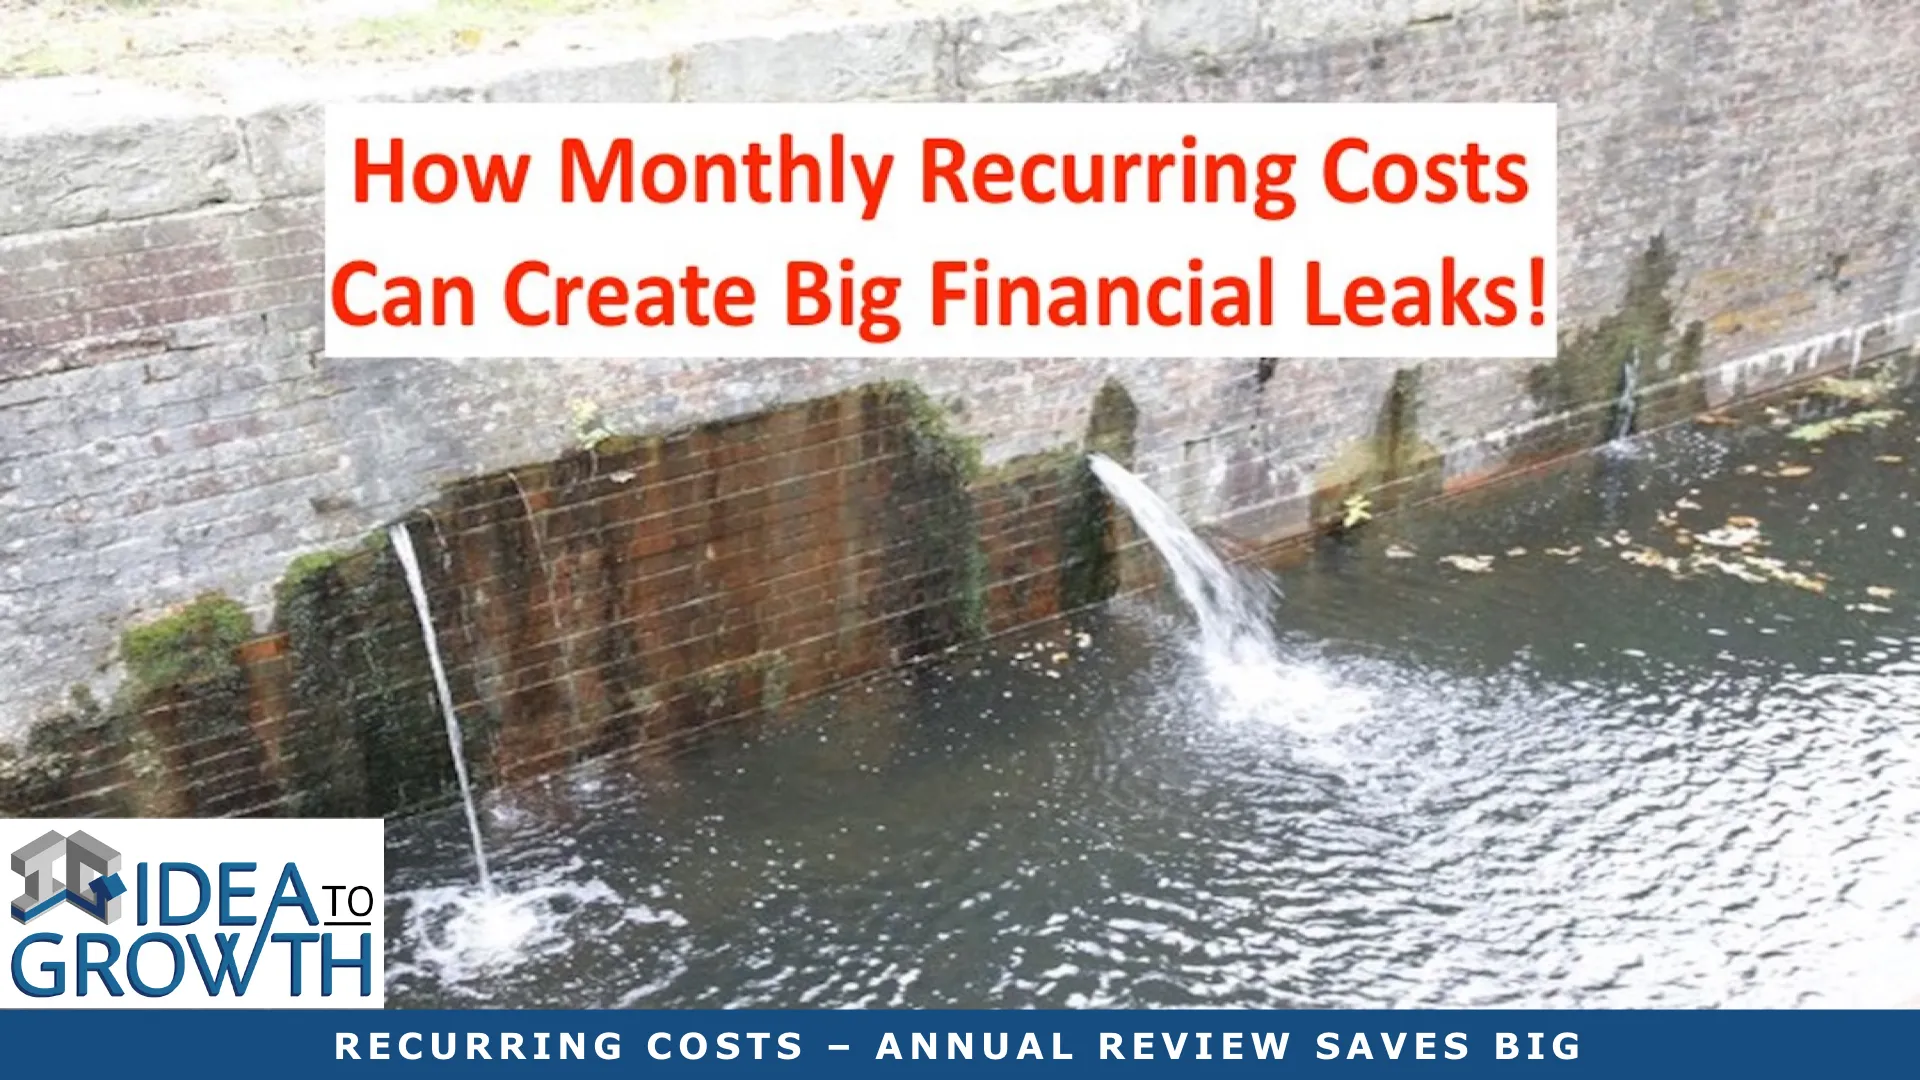 RECURRING COSTS – ANNUAL REVIEW SAVES BIG